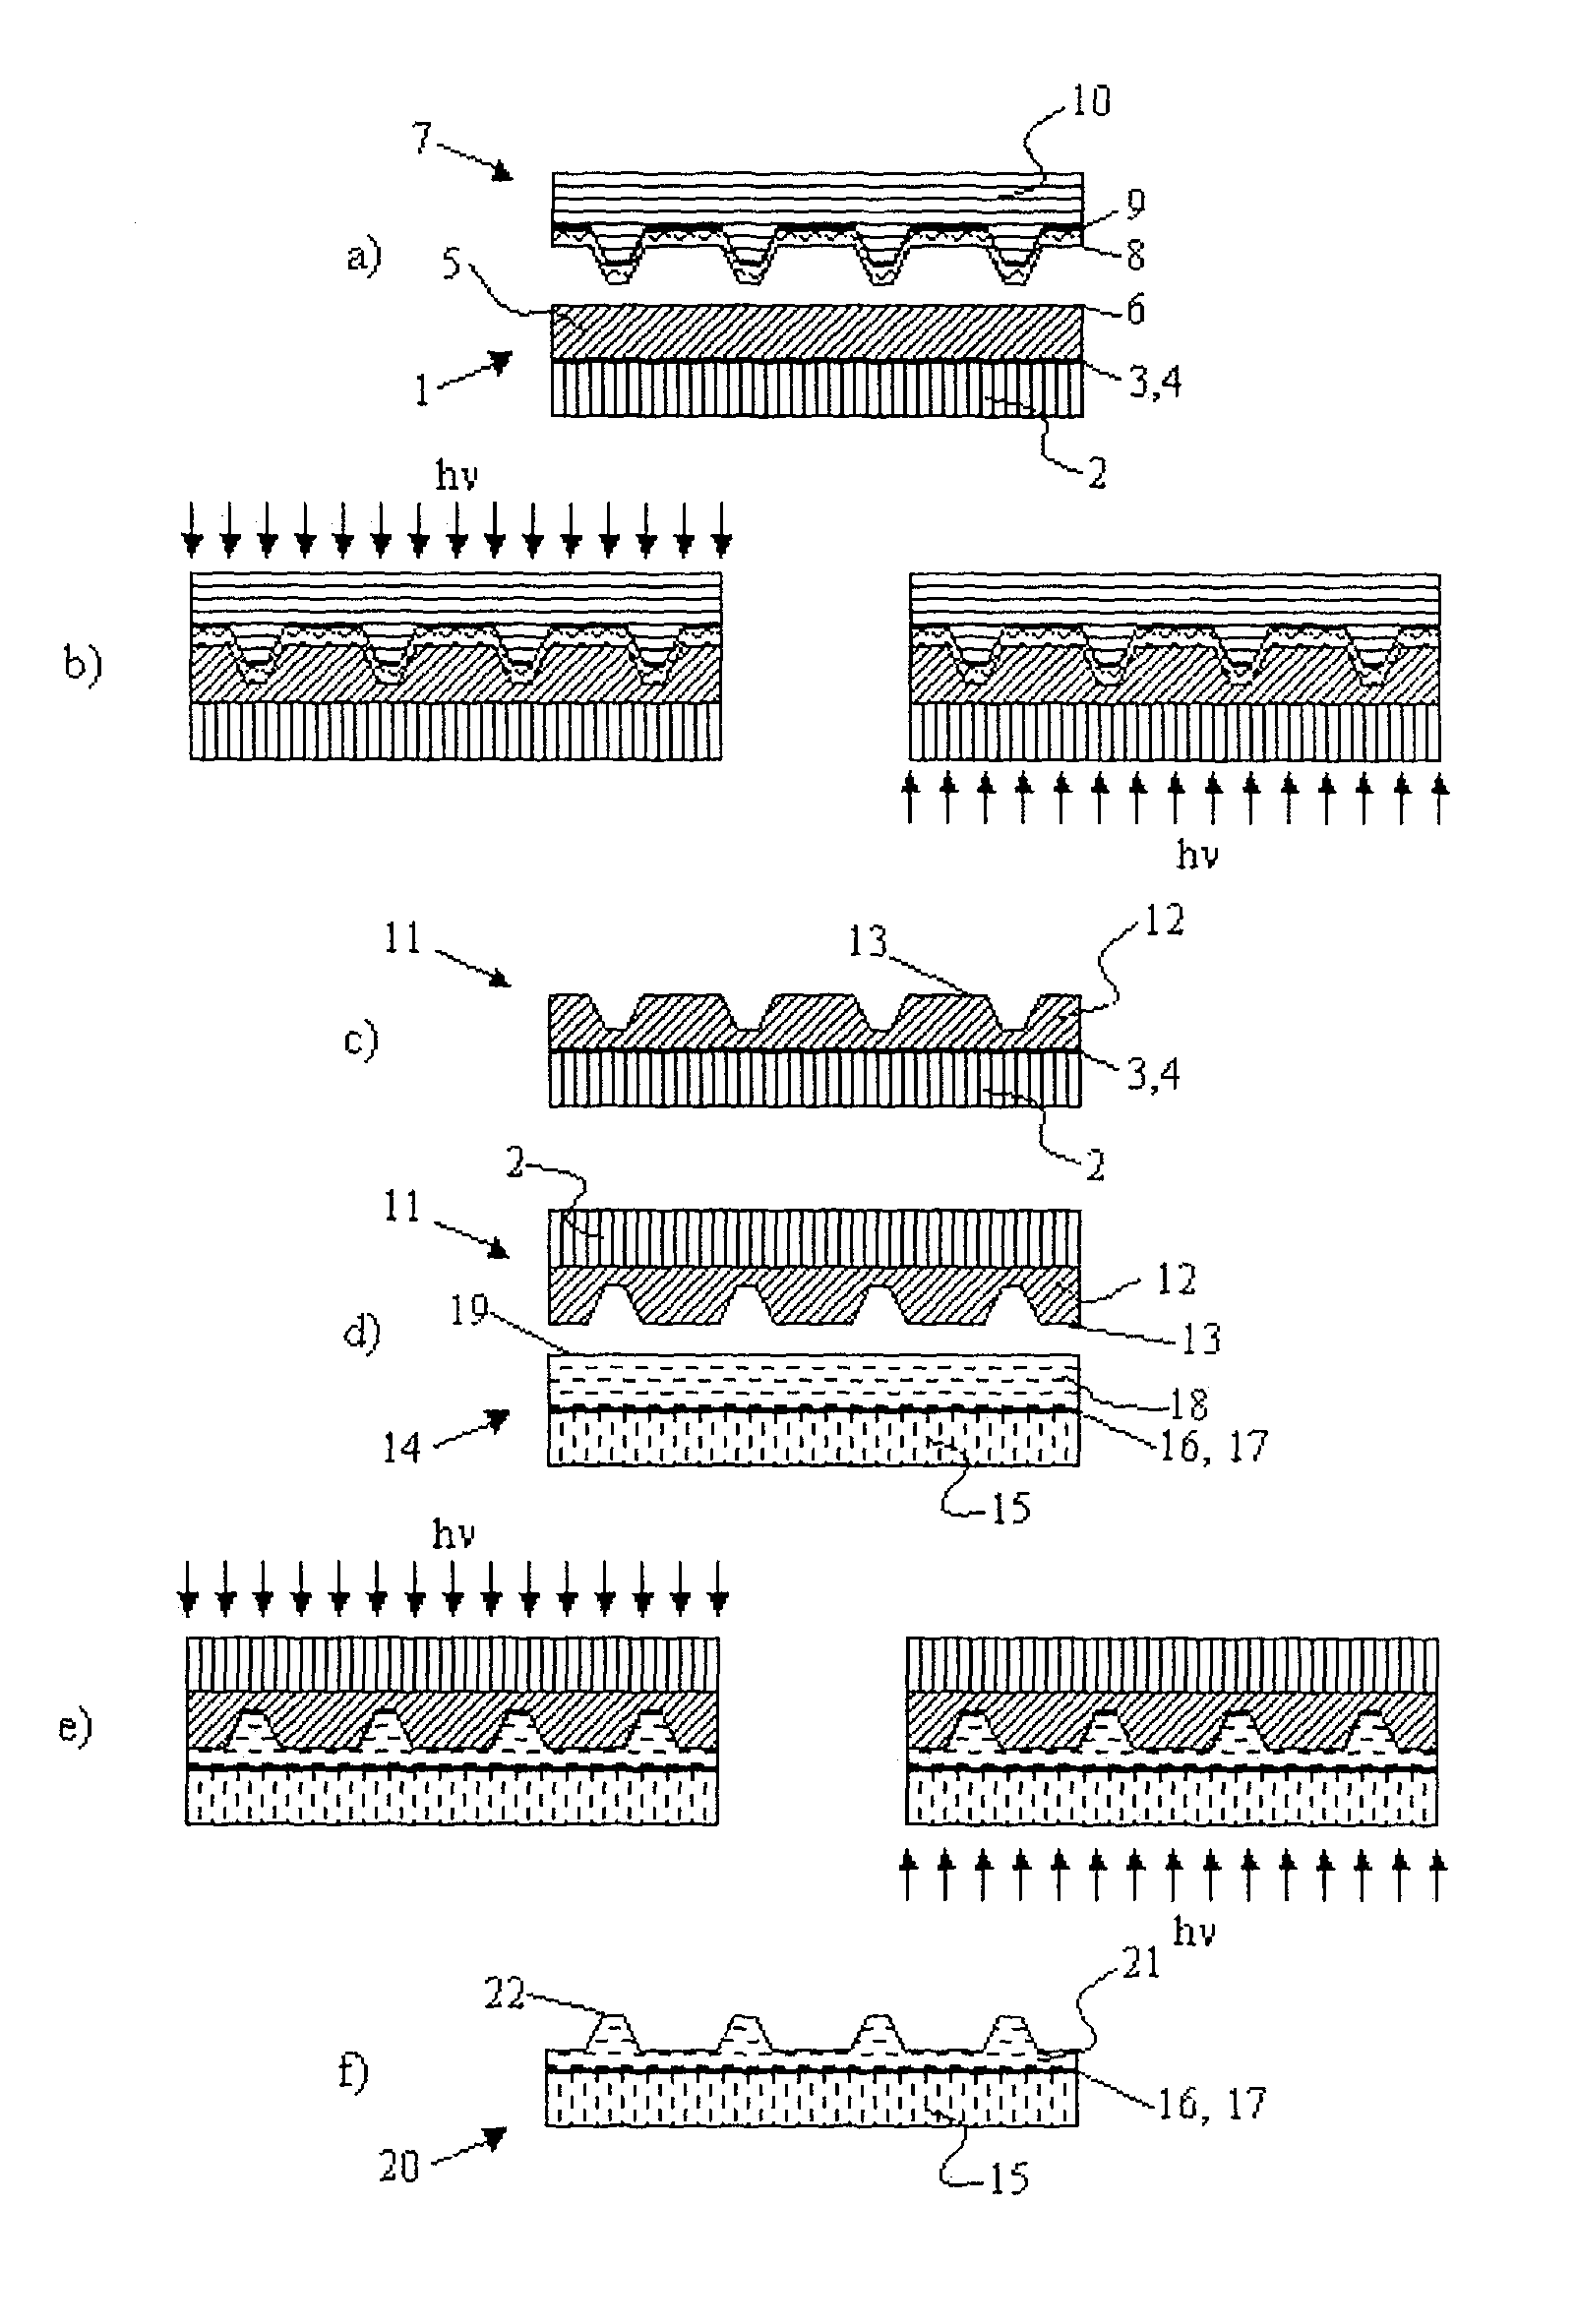 Process and method for modifying polymer film surface interaction